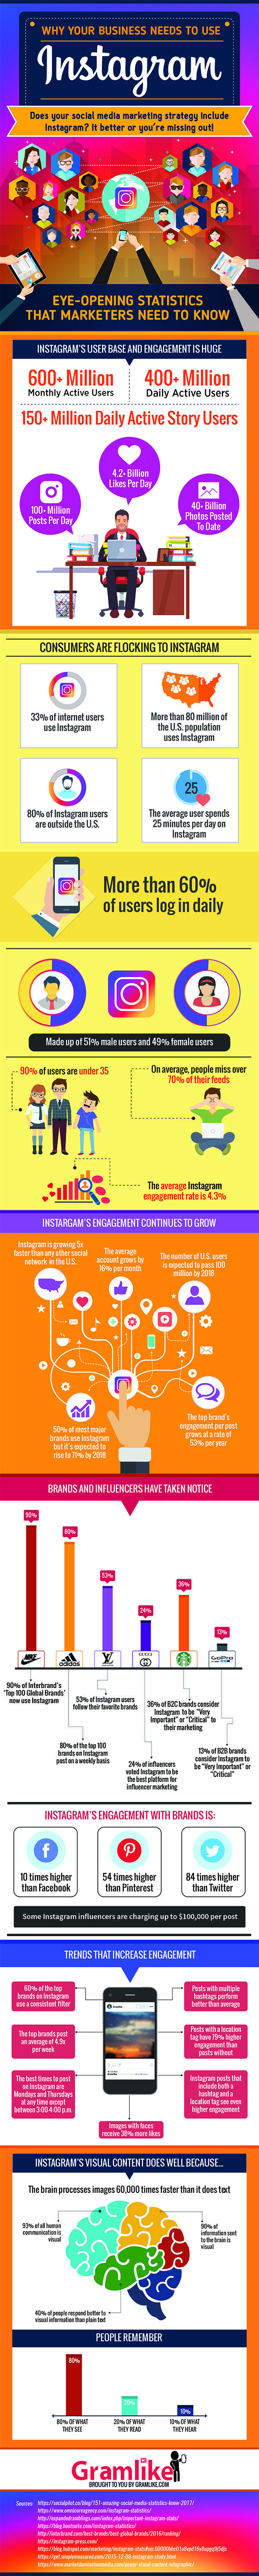 Why Your Business Needs to consider Instagram Marketing